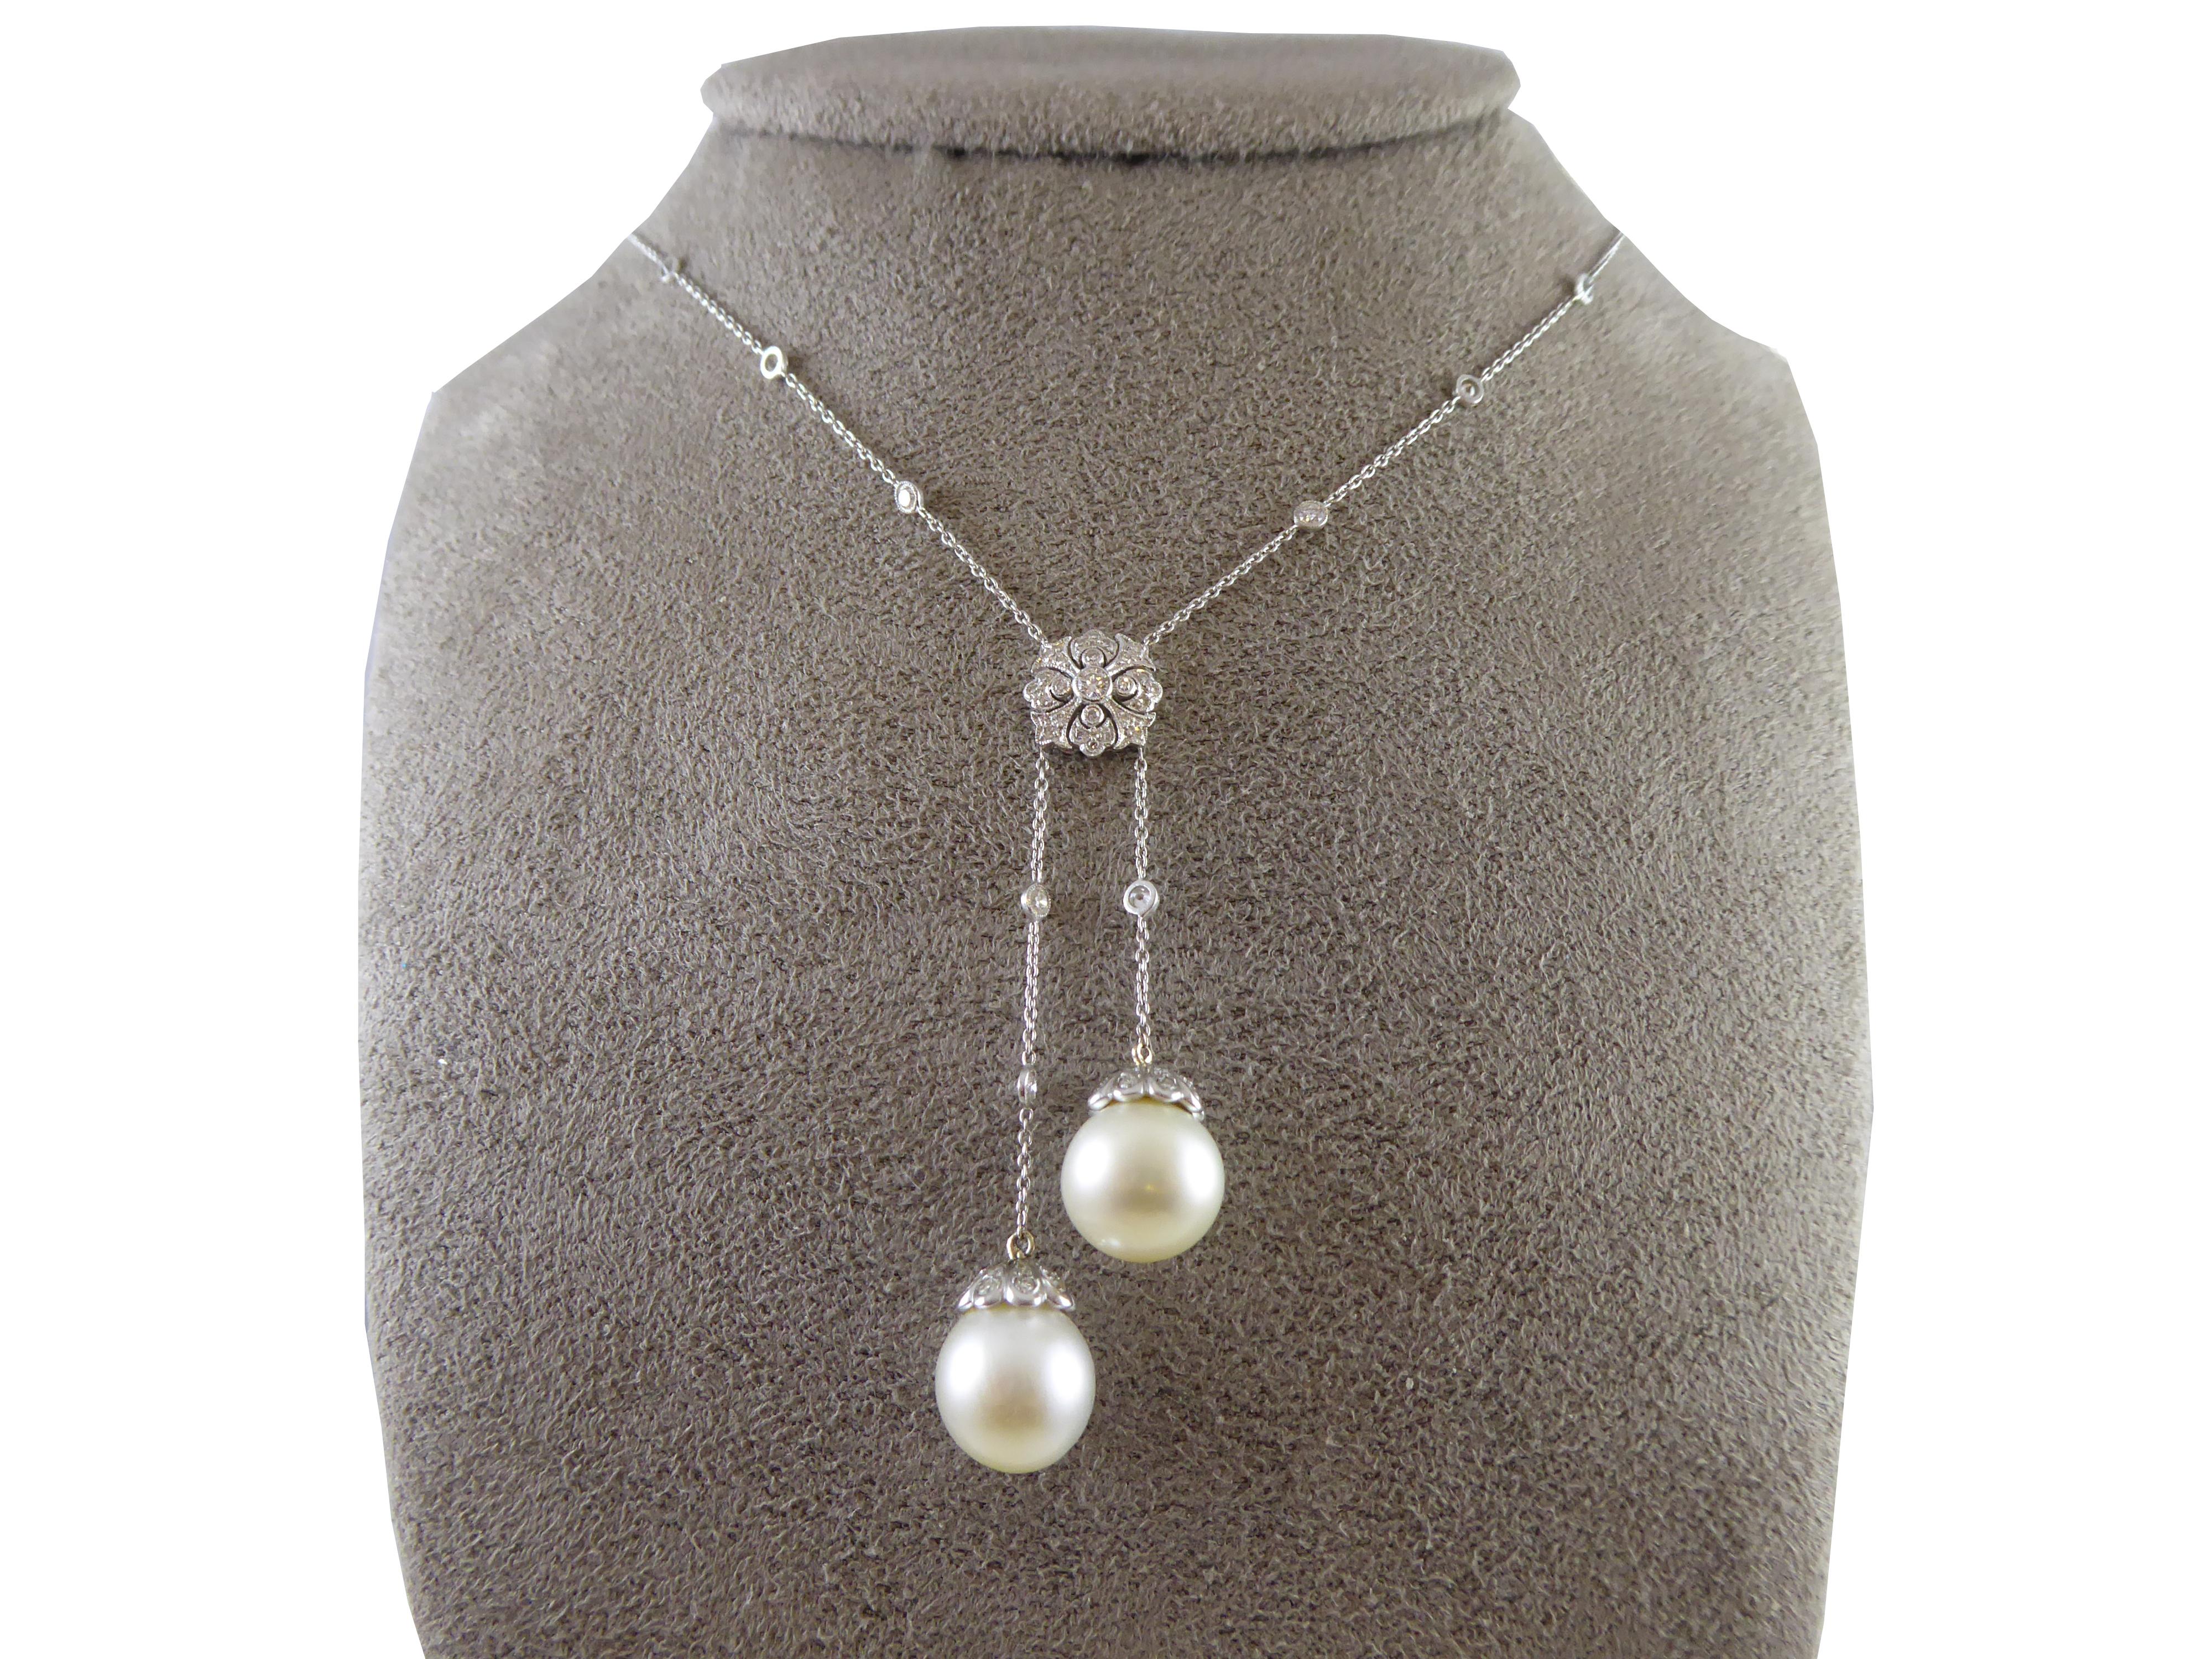 Women's Vintage Cultured Pearl and Diamond Negligee Necklace